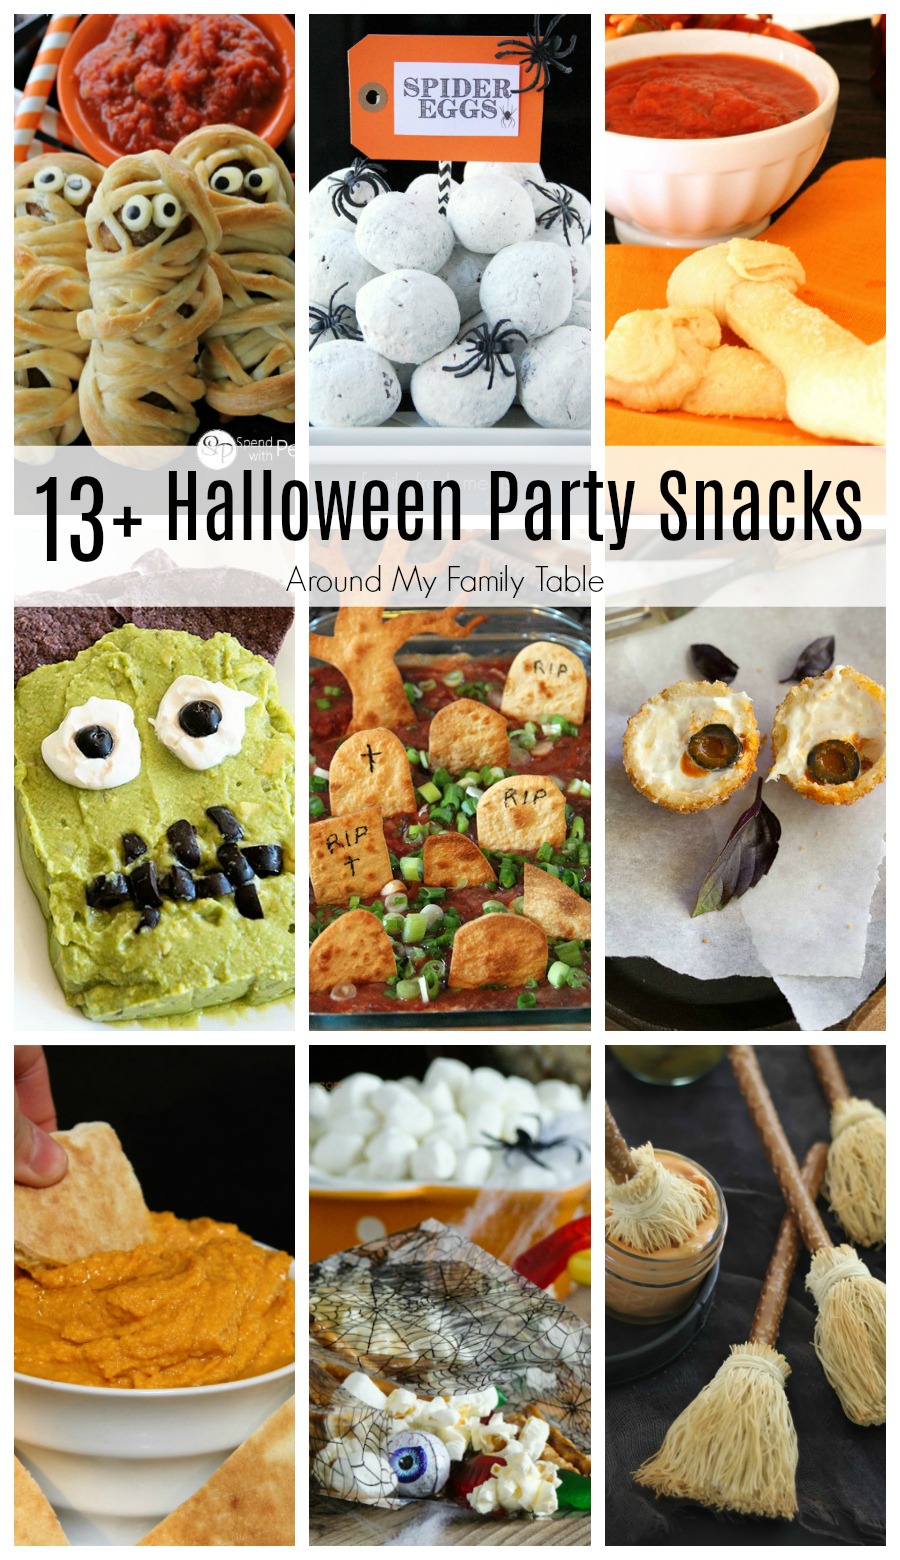 Are you planning a Halloween party or a playdate for the kids this year?  It’s the perfect time to stir up some fun with these 13 incredible and crowd-pleasing Halloween Party Snacks that have loads of flavor!